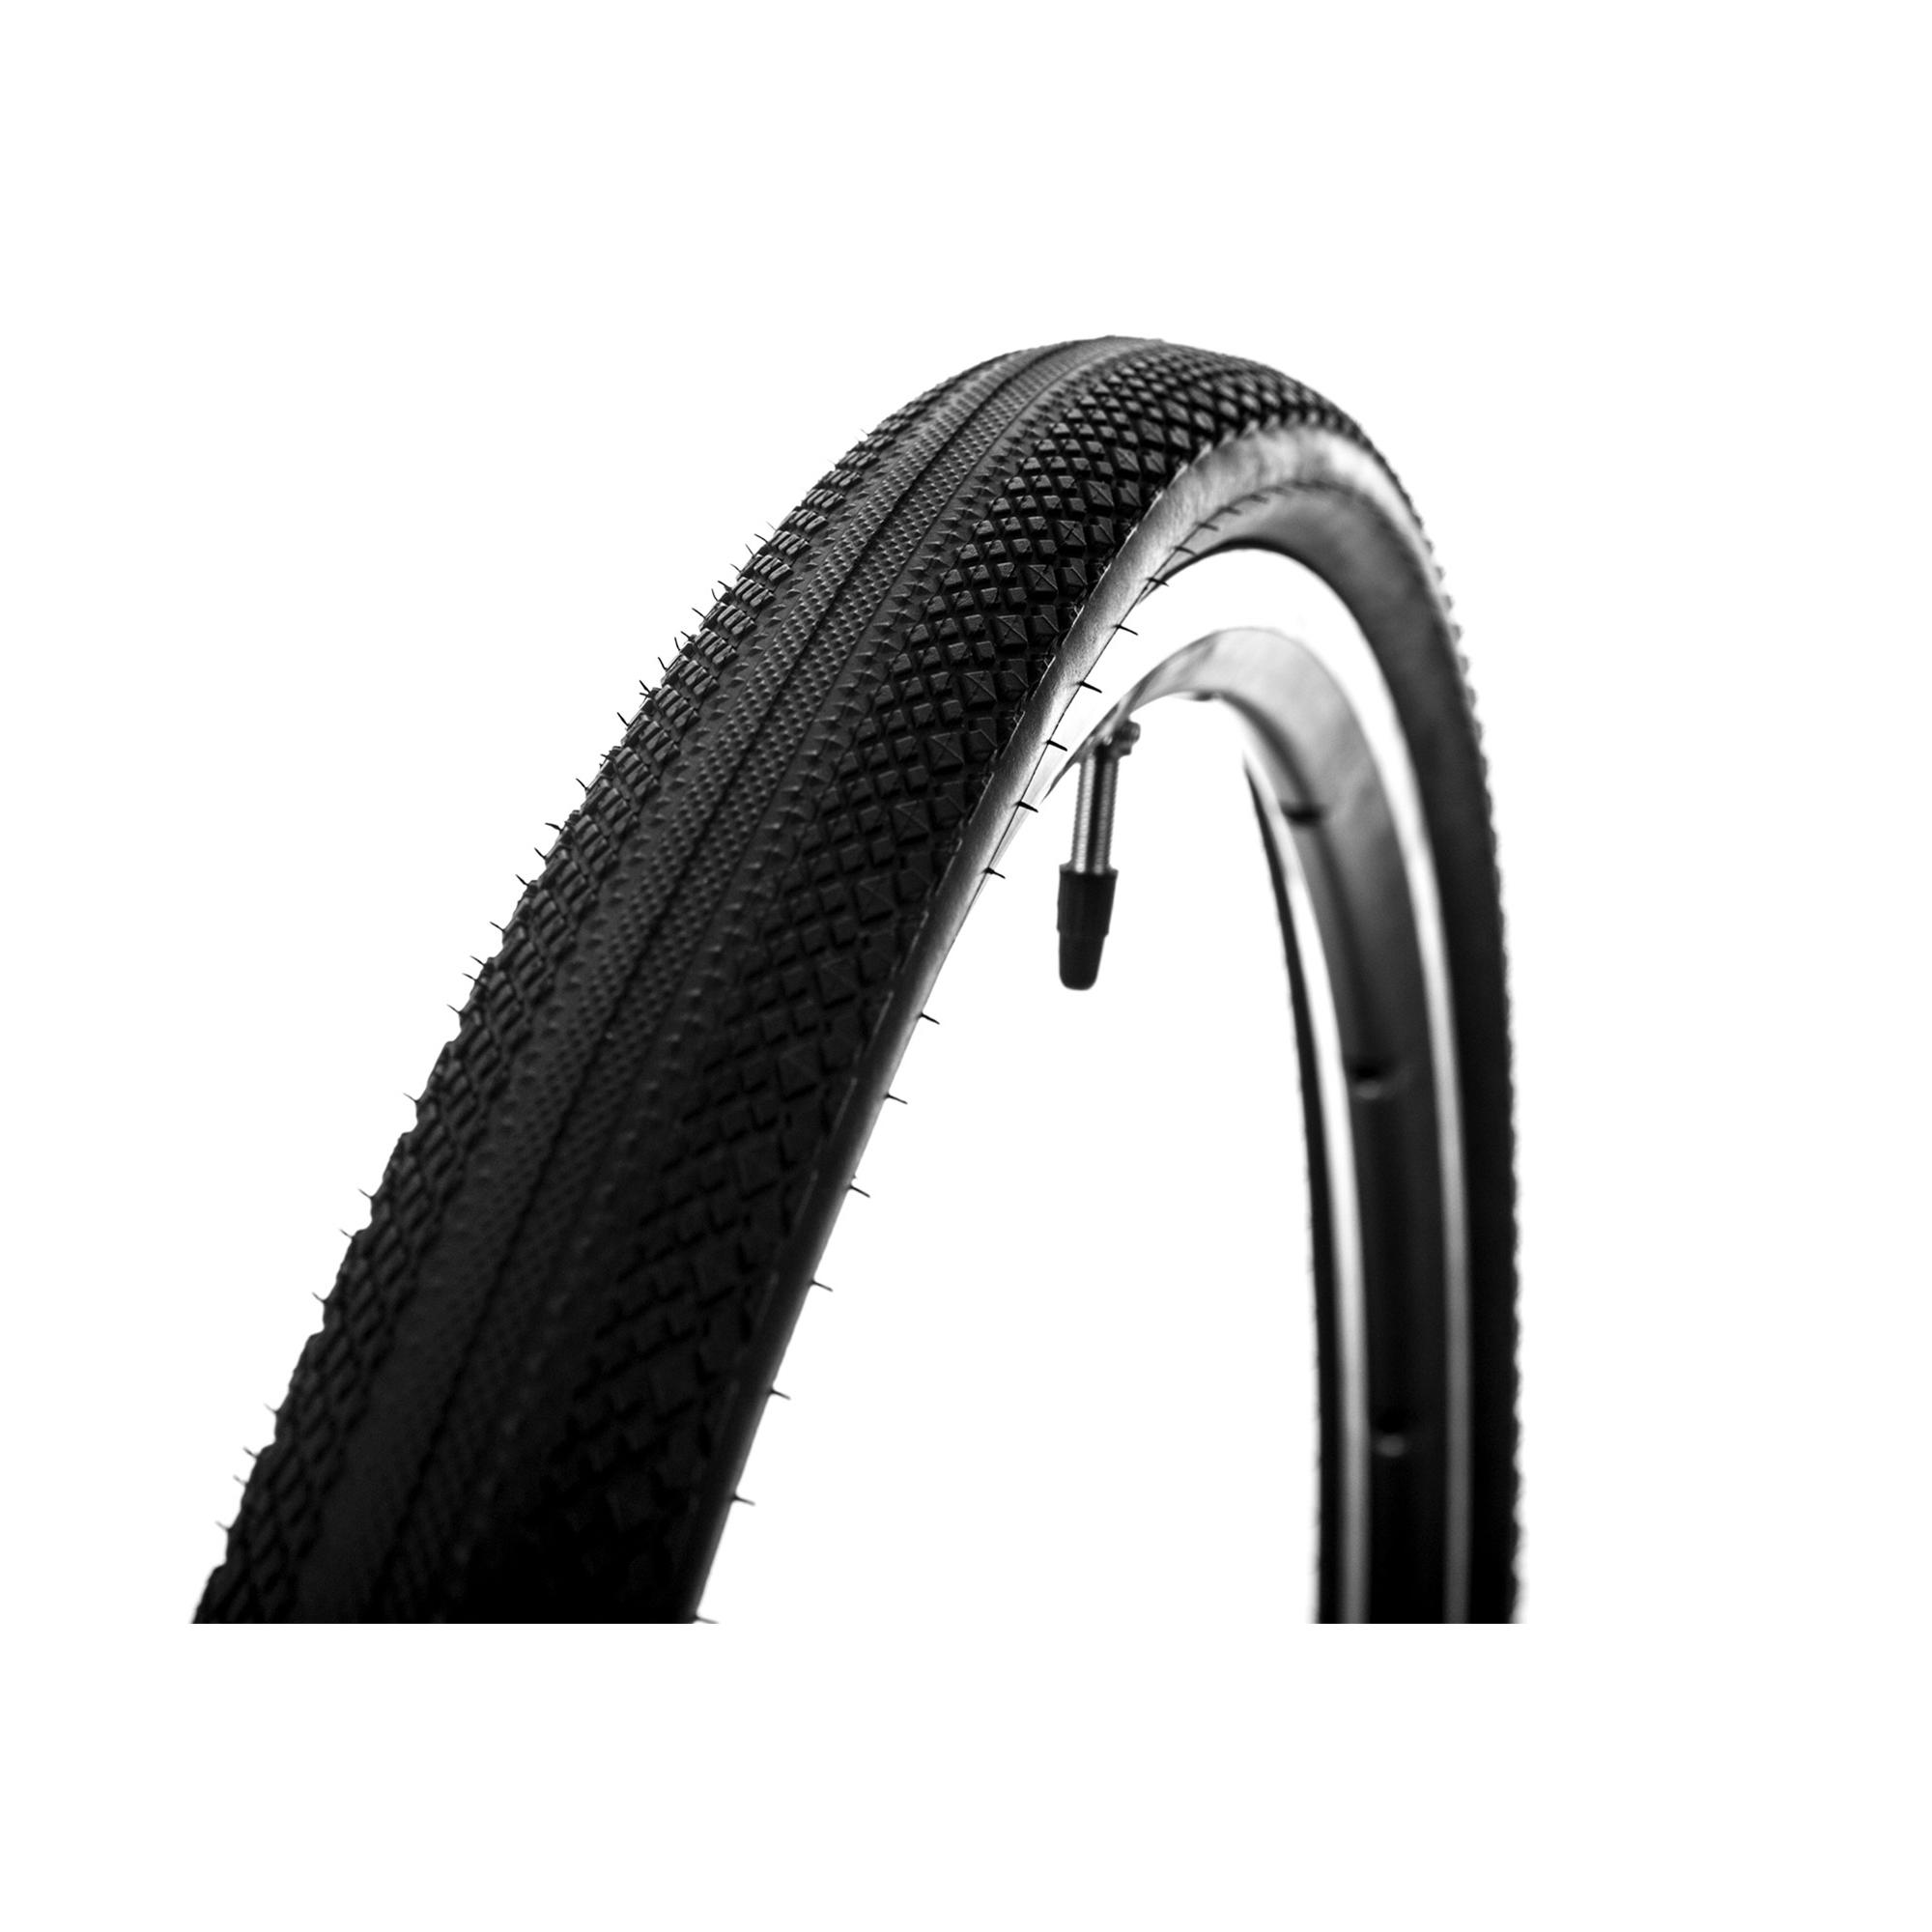 Cauciuc HUTCHINSON OVERIDE TLR 700x35c (tubeless ready) 700x35c